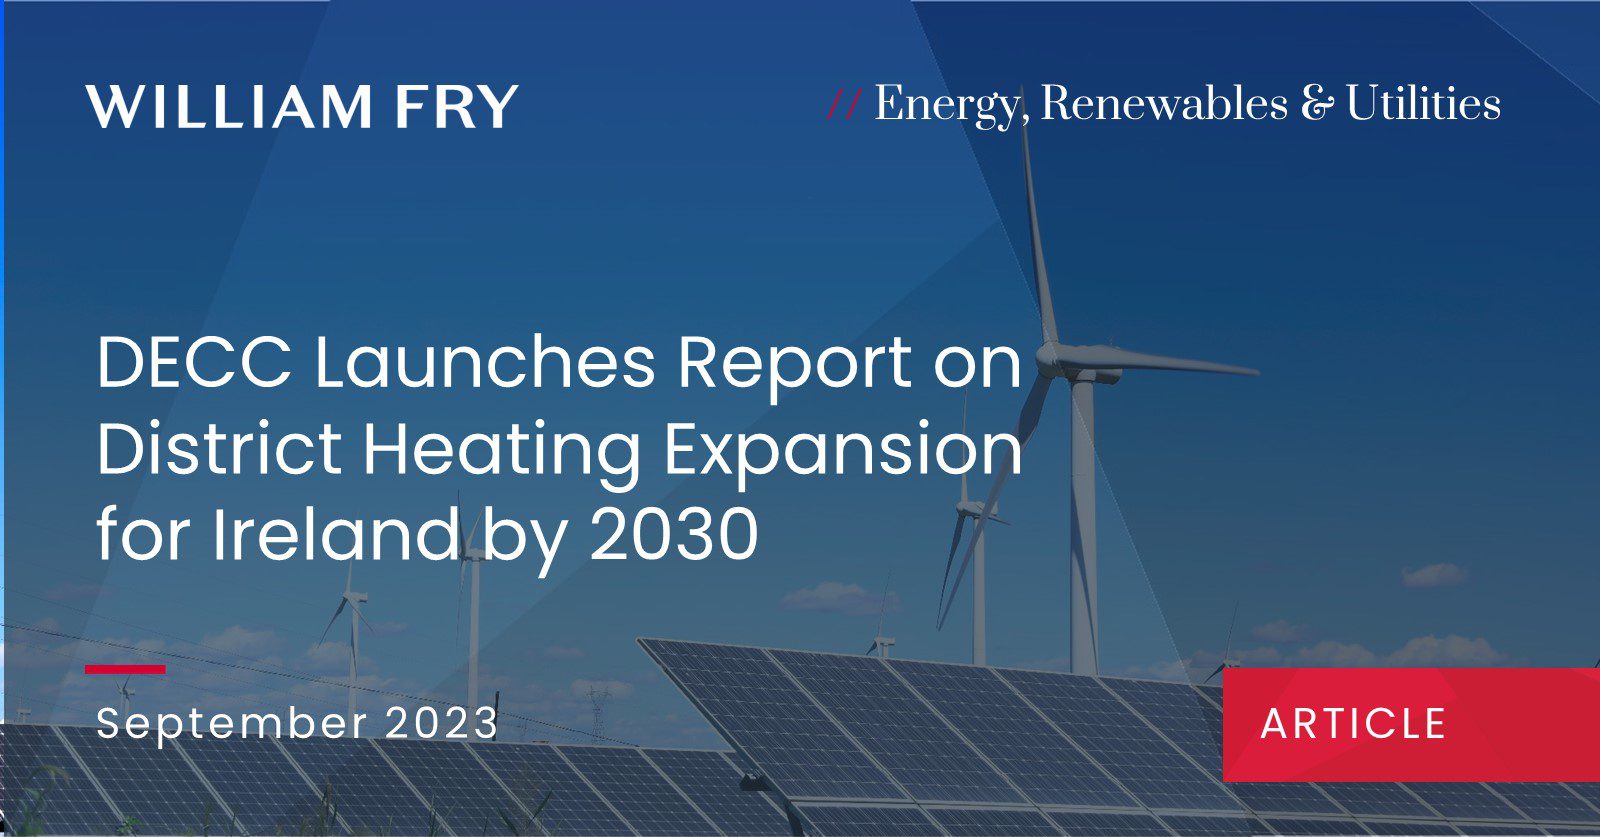 DECC Launches Report on District Heating Expansion for Ireland by 2030